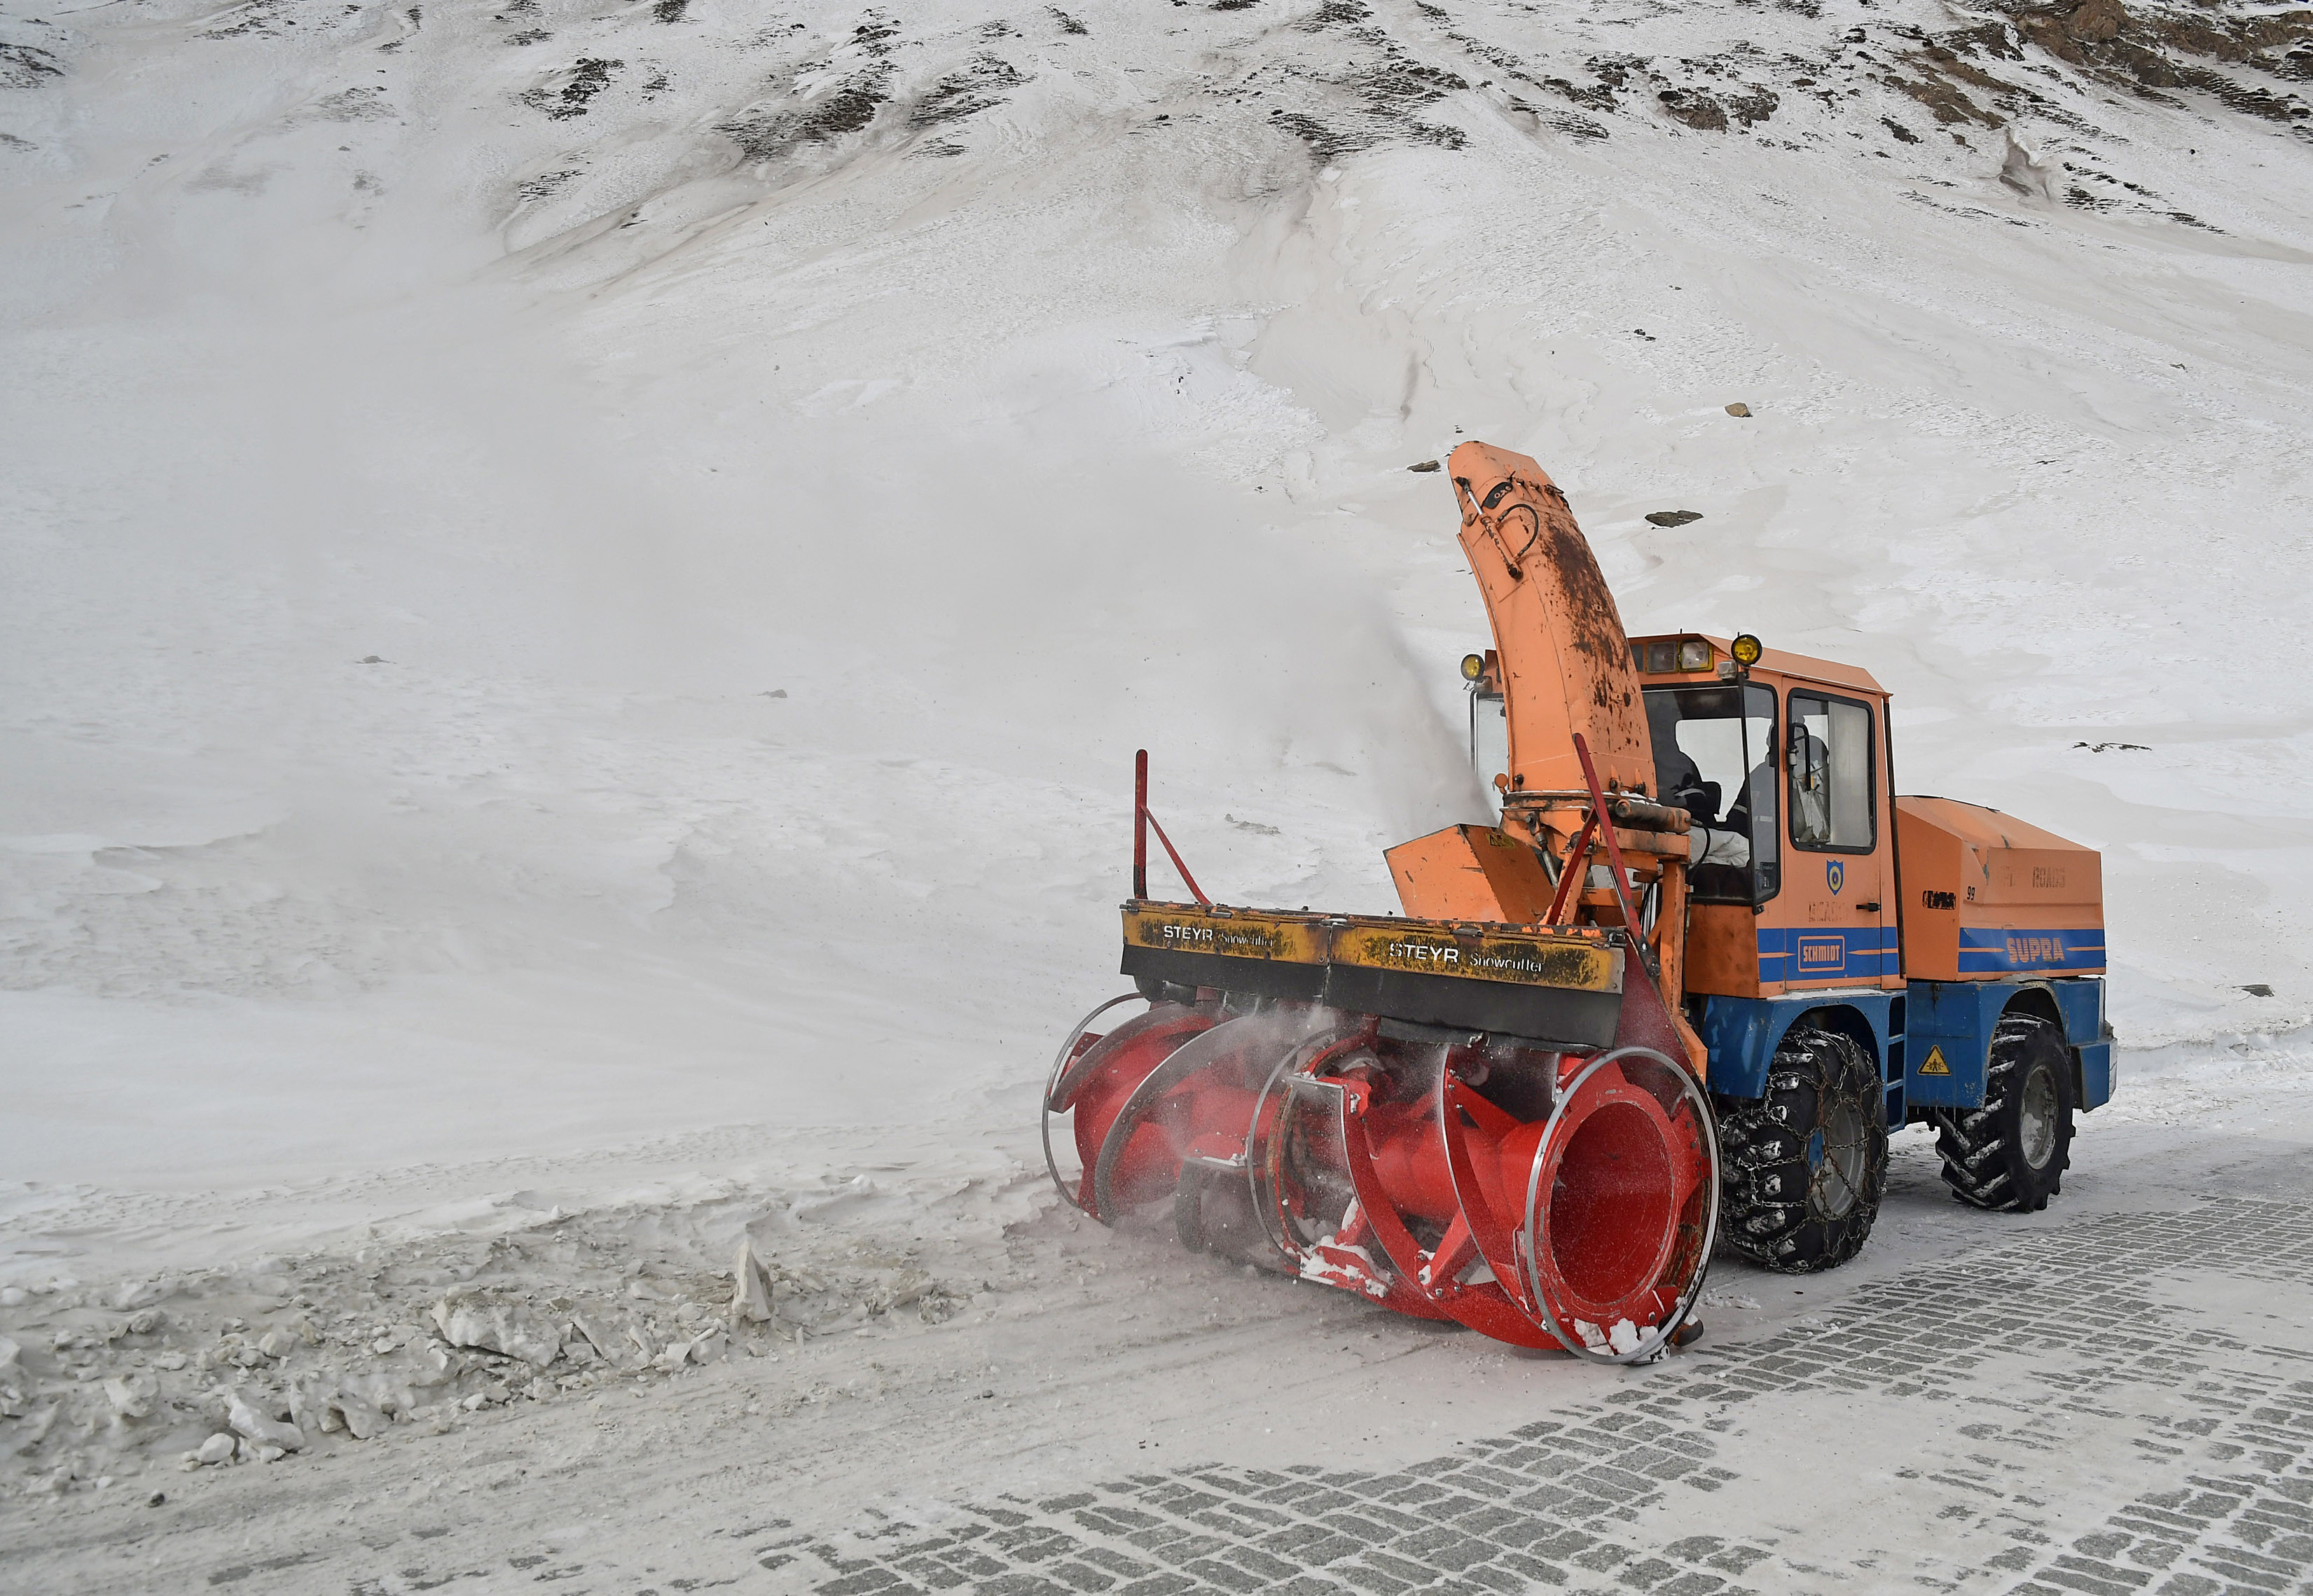 Snow is being cleared from the road on the Srinagar-Leh Highway